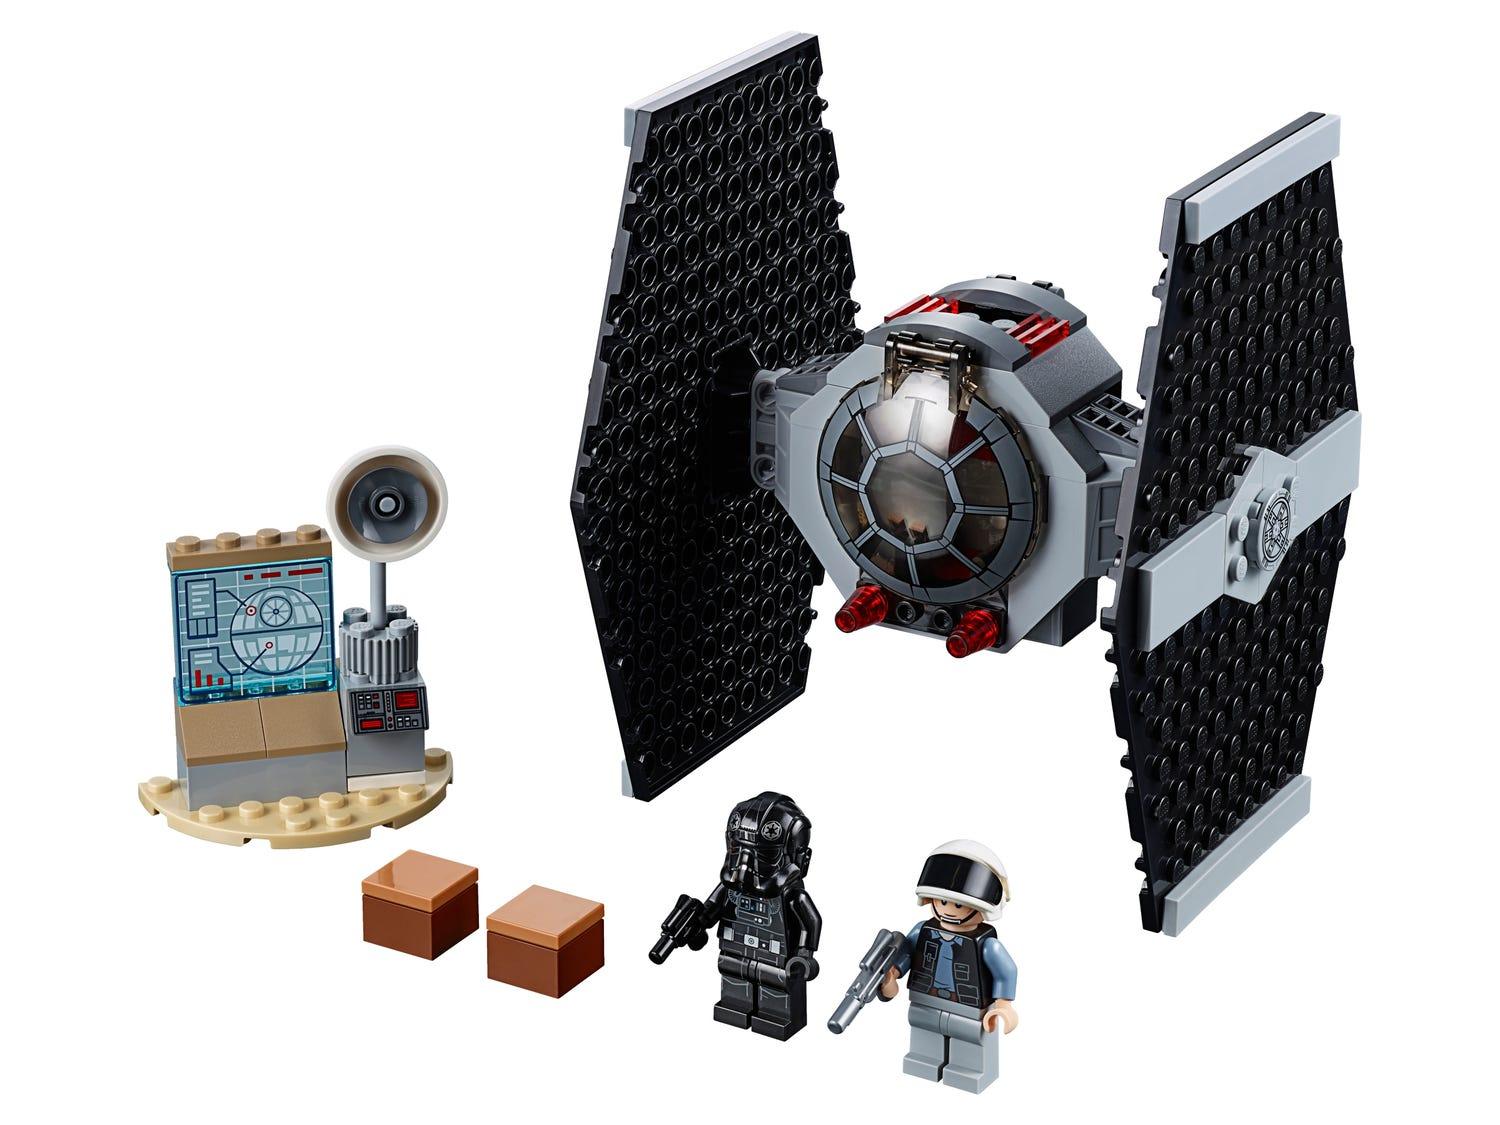 LEGO Imperial TIE Fighter 75237 StarWars | 2TTOYS ✓ Official shop<br>